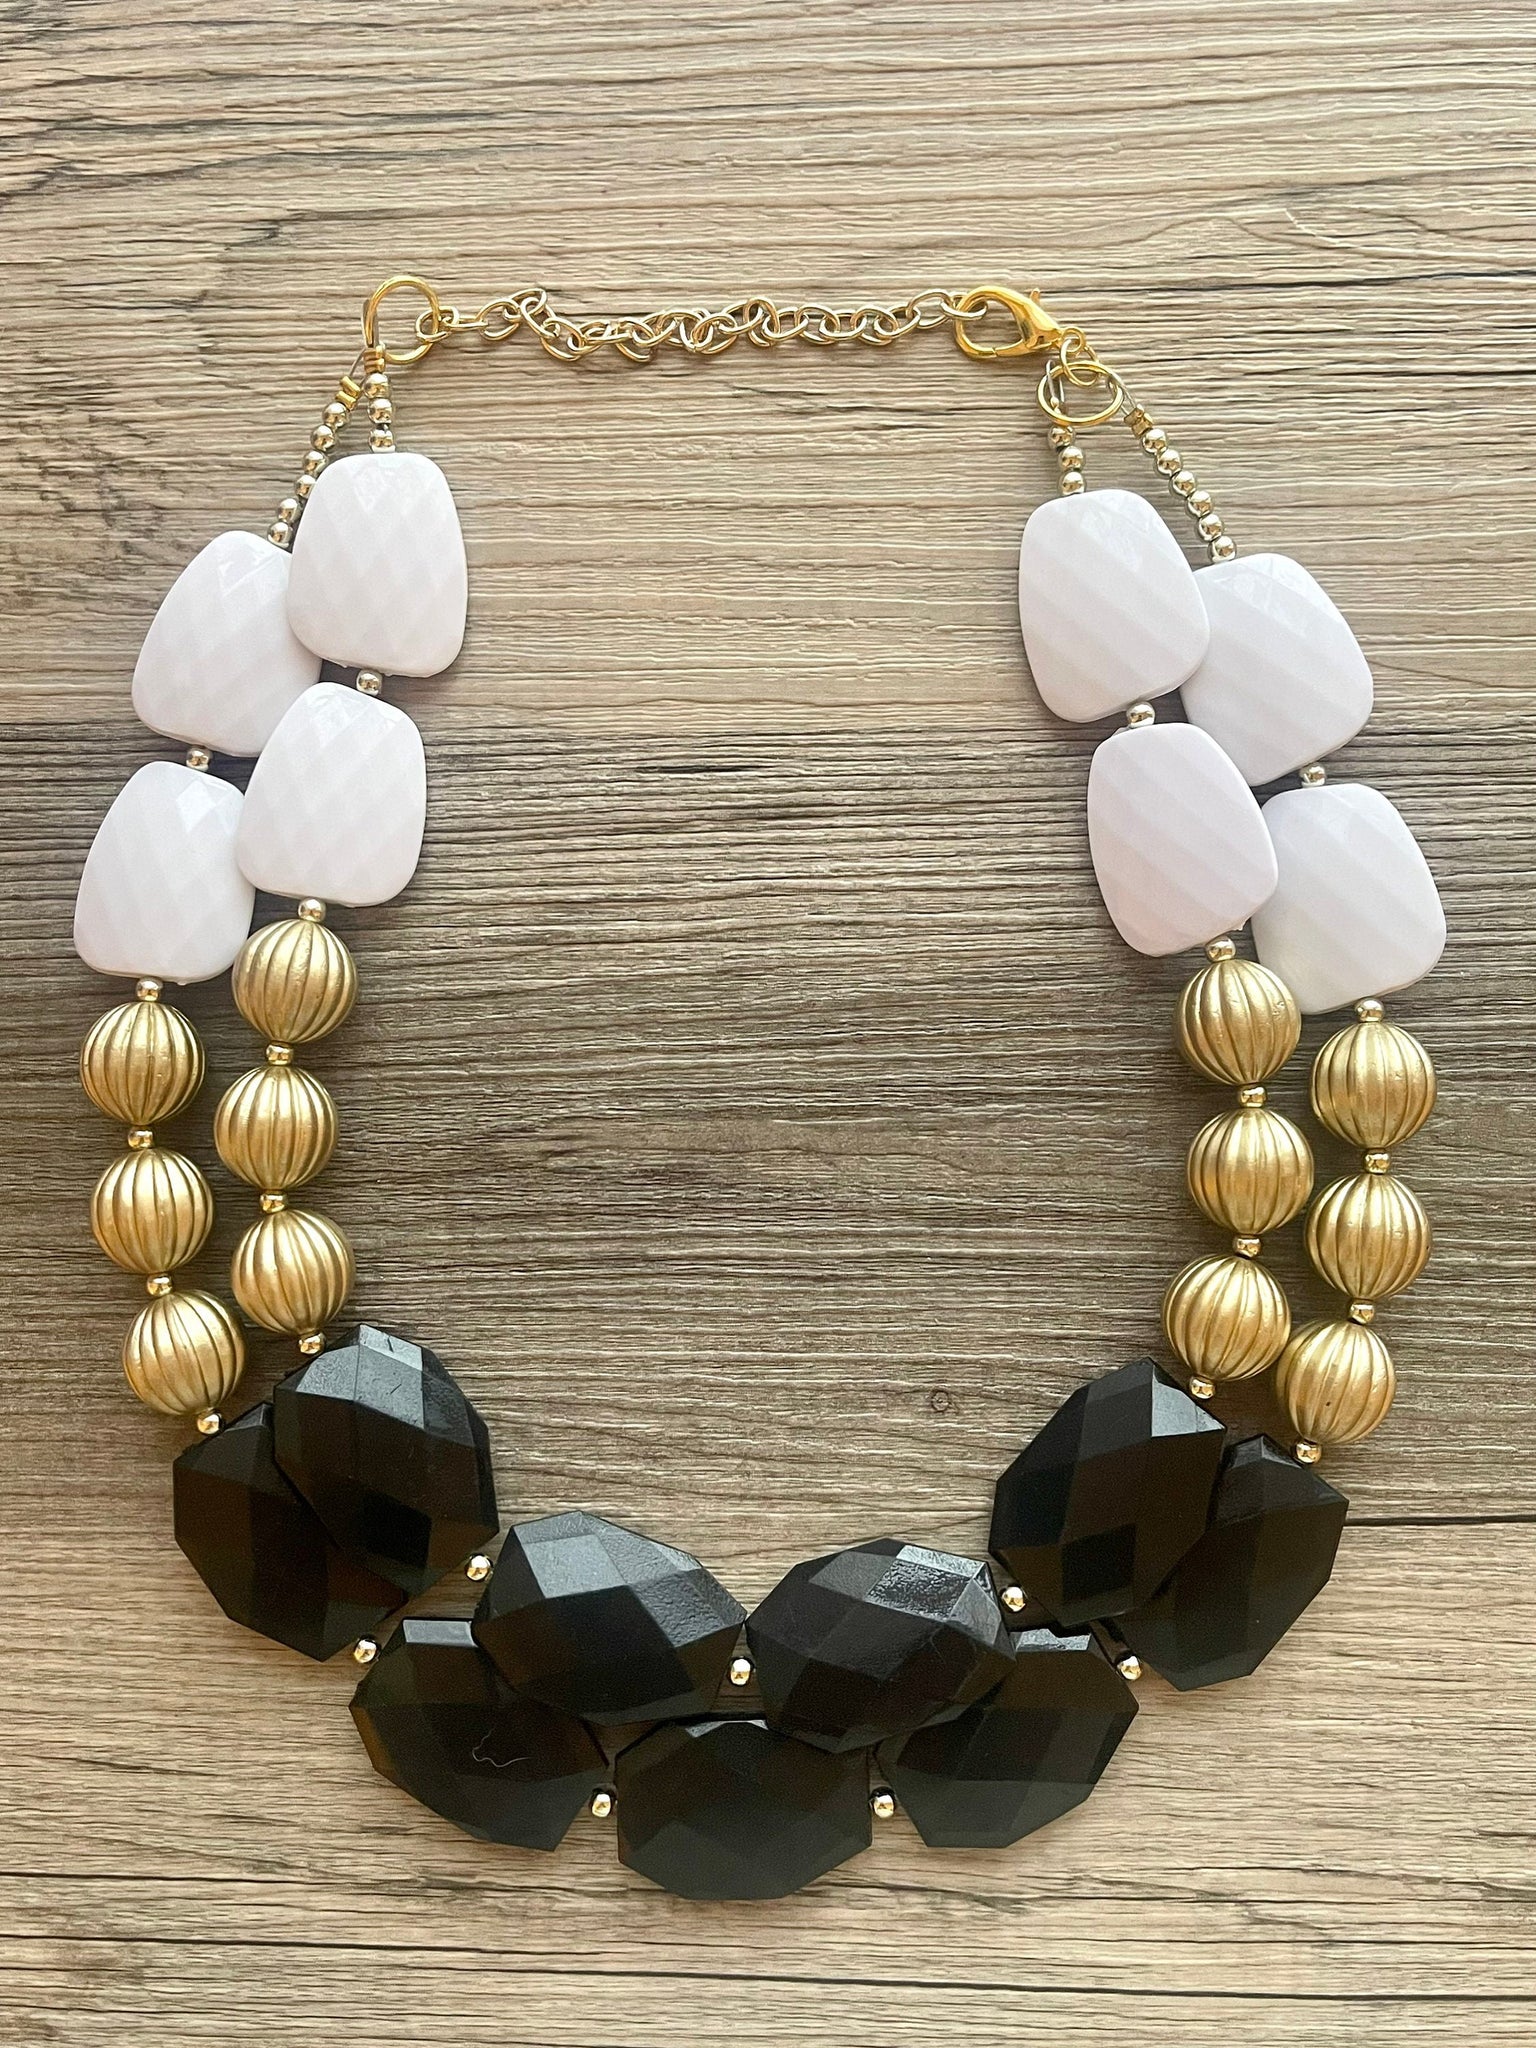 Burnished Gold Chunky Statement Necklace & Earring Set With Multiple Ornate  Chains & Mirrored Stones - Fringe, Flowers and Frills